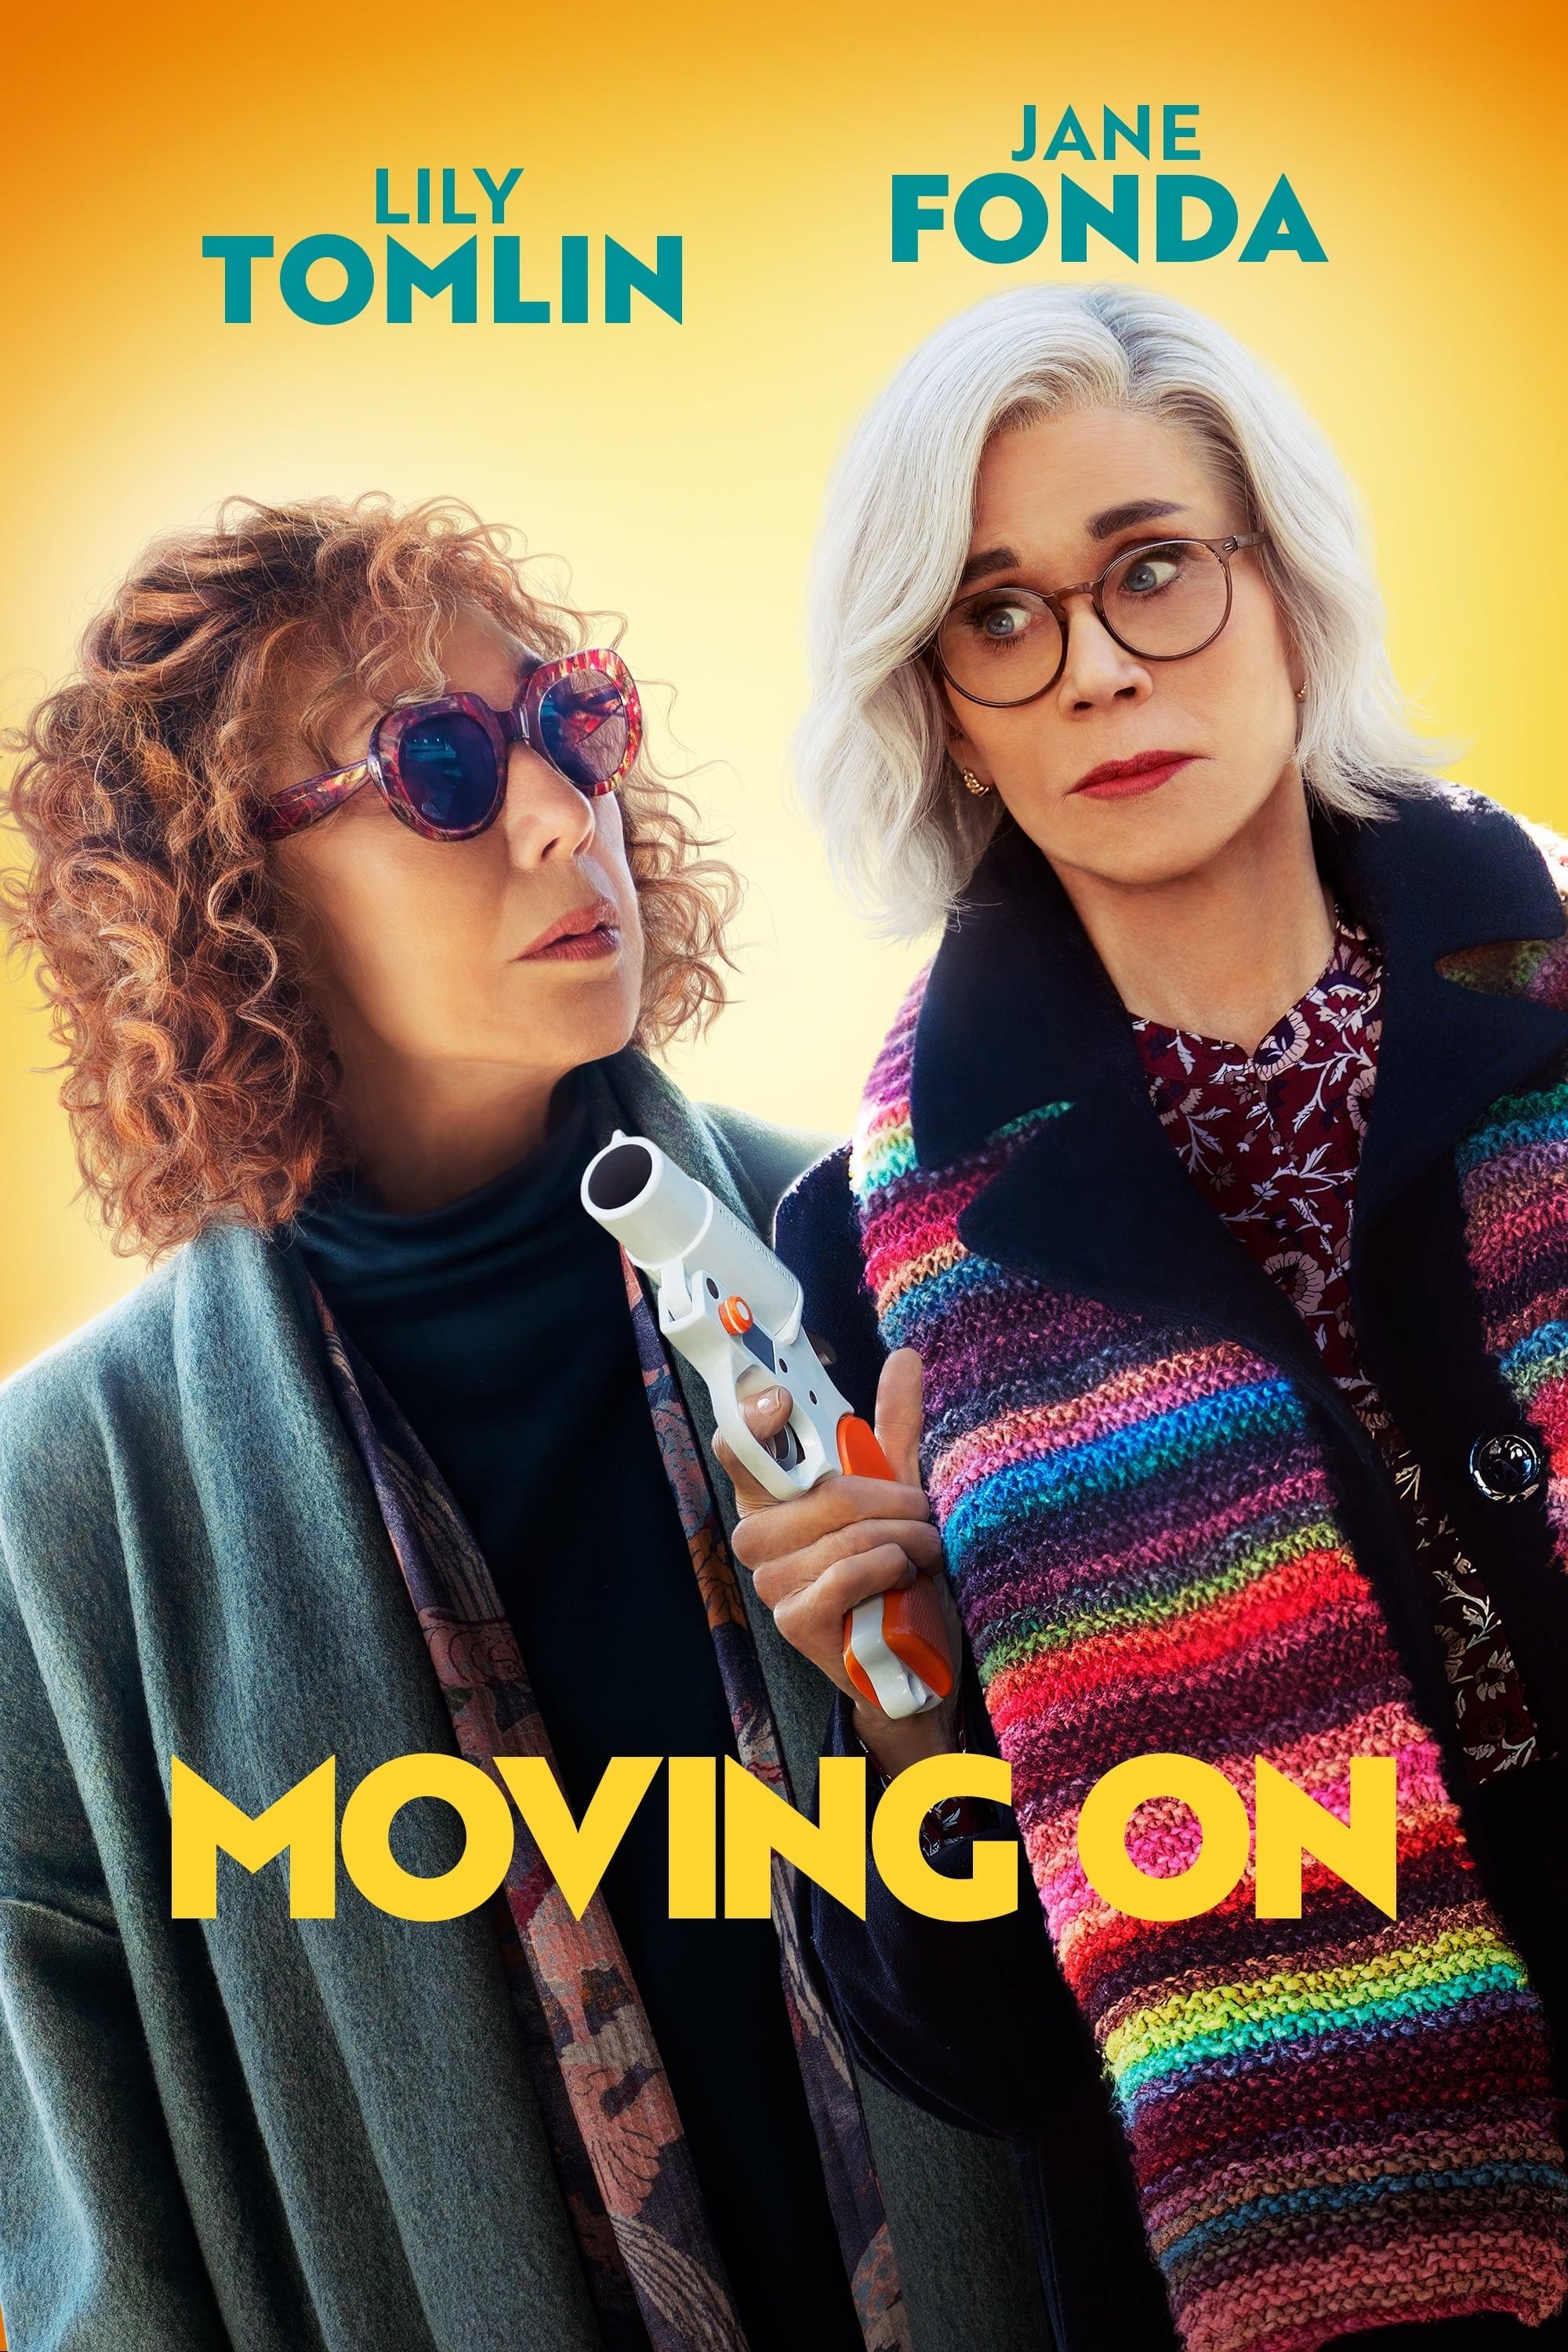 Moving On poster